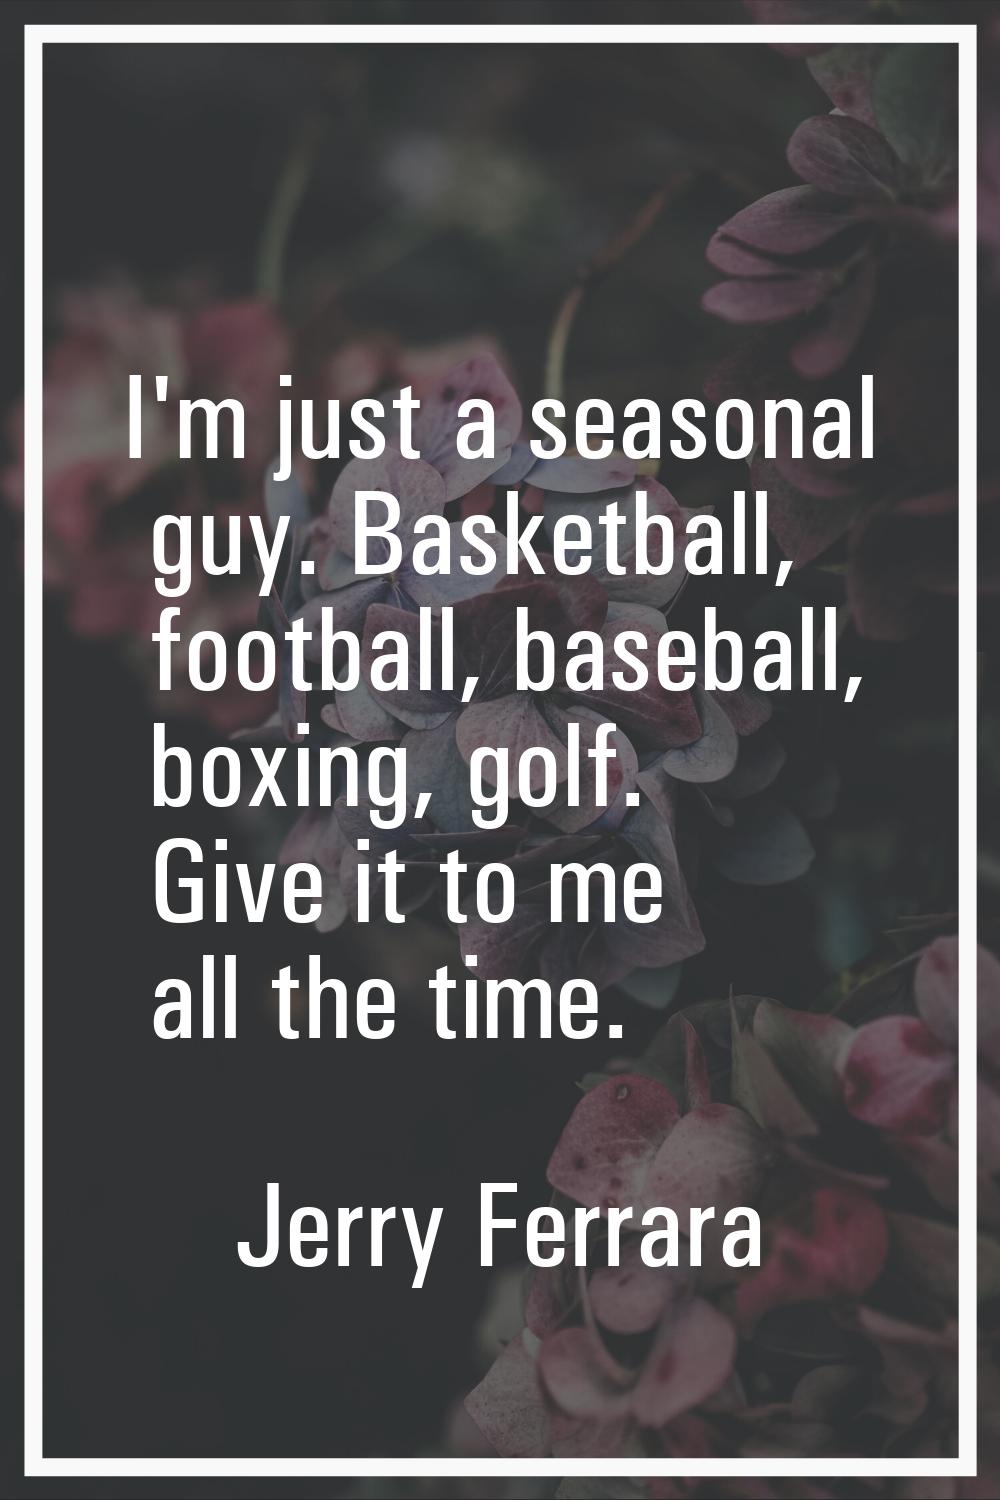 I'm just a seasonal guy. Basketball, football, baseball, boxing, golf. Give it to me all the time.